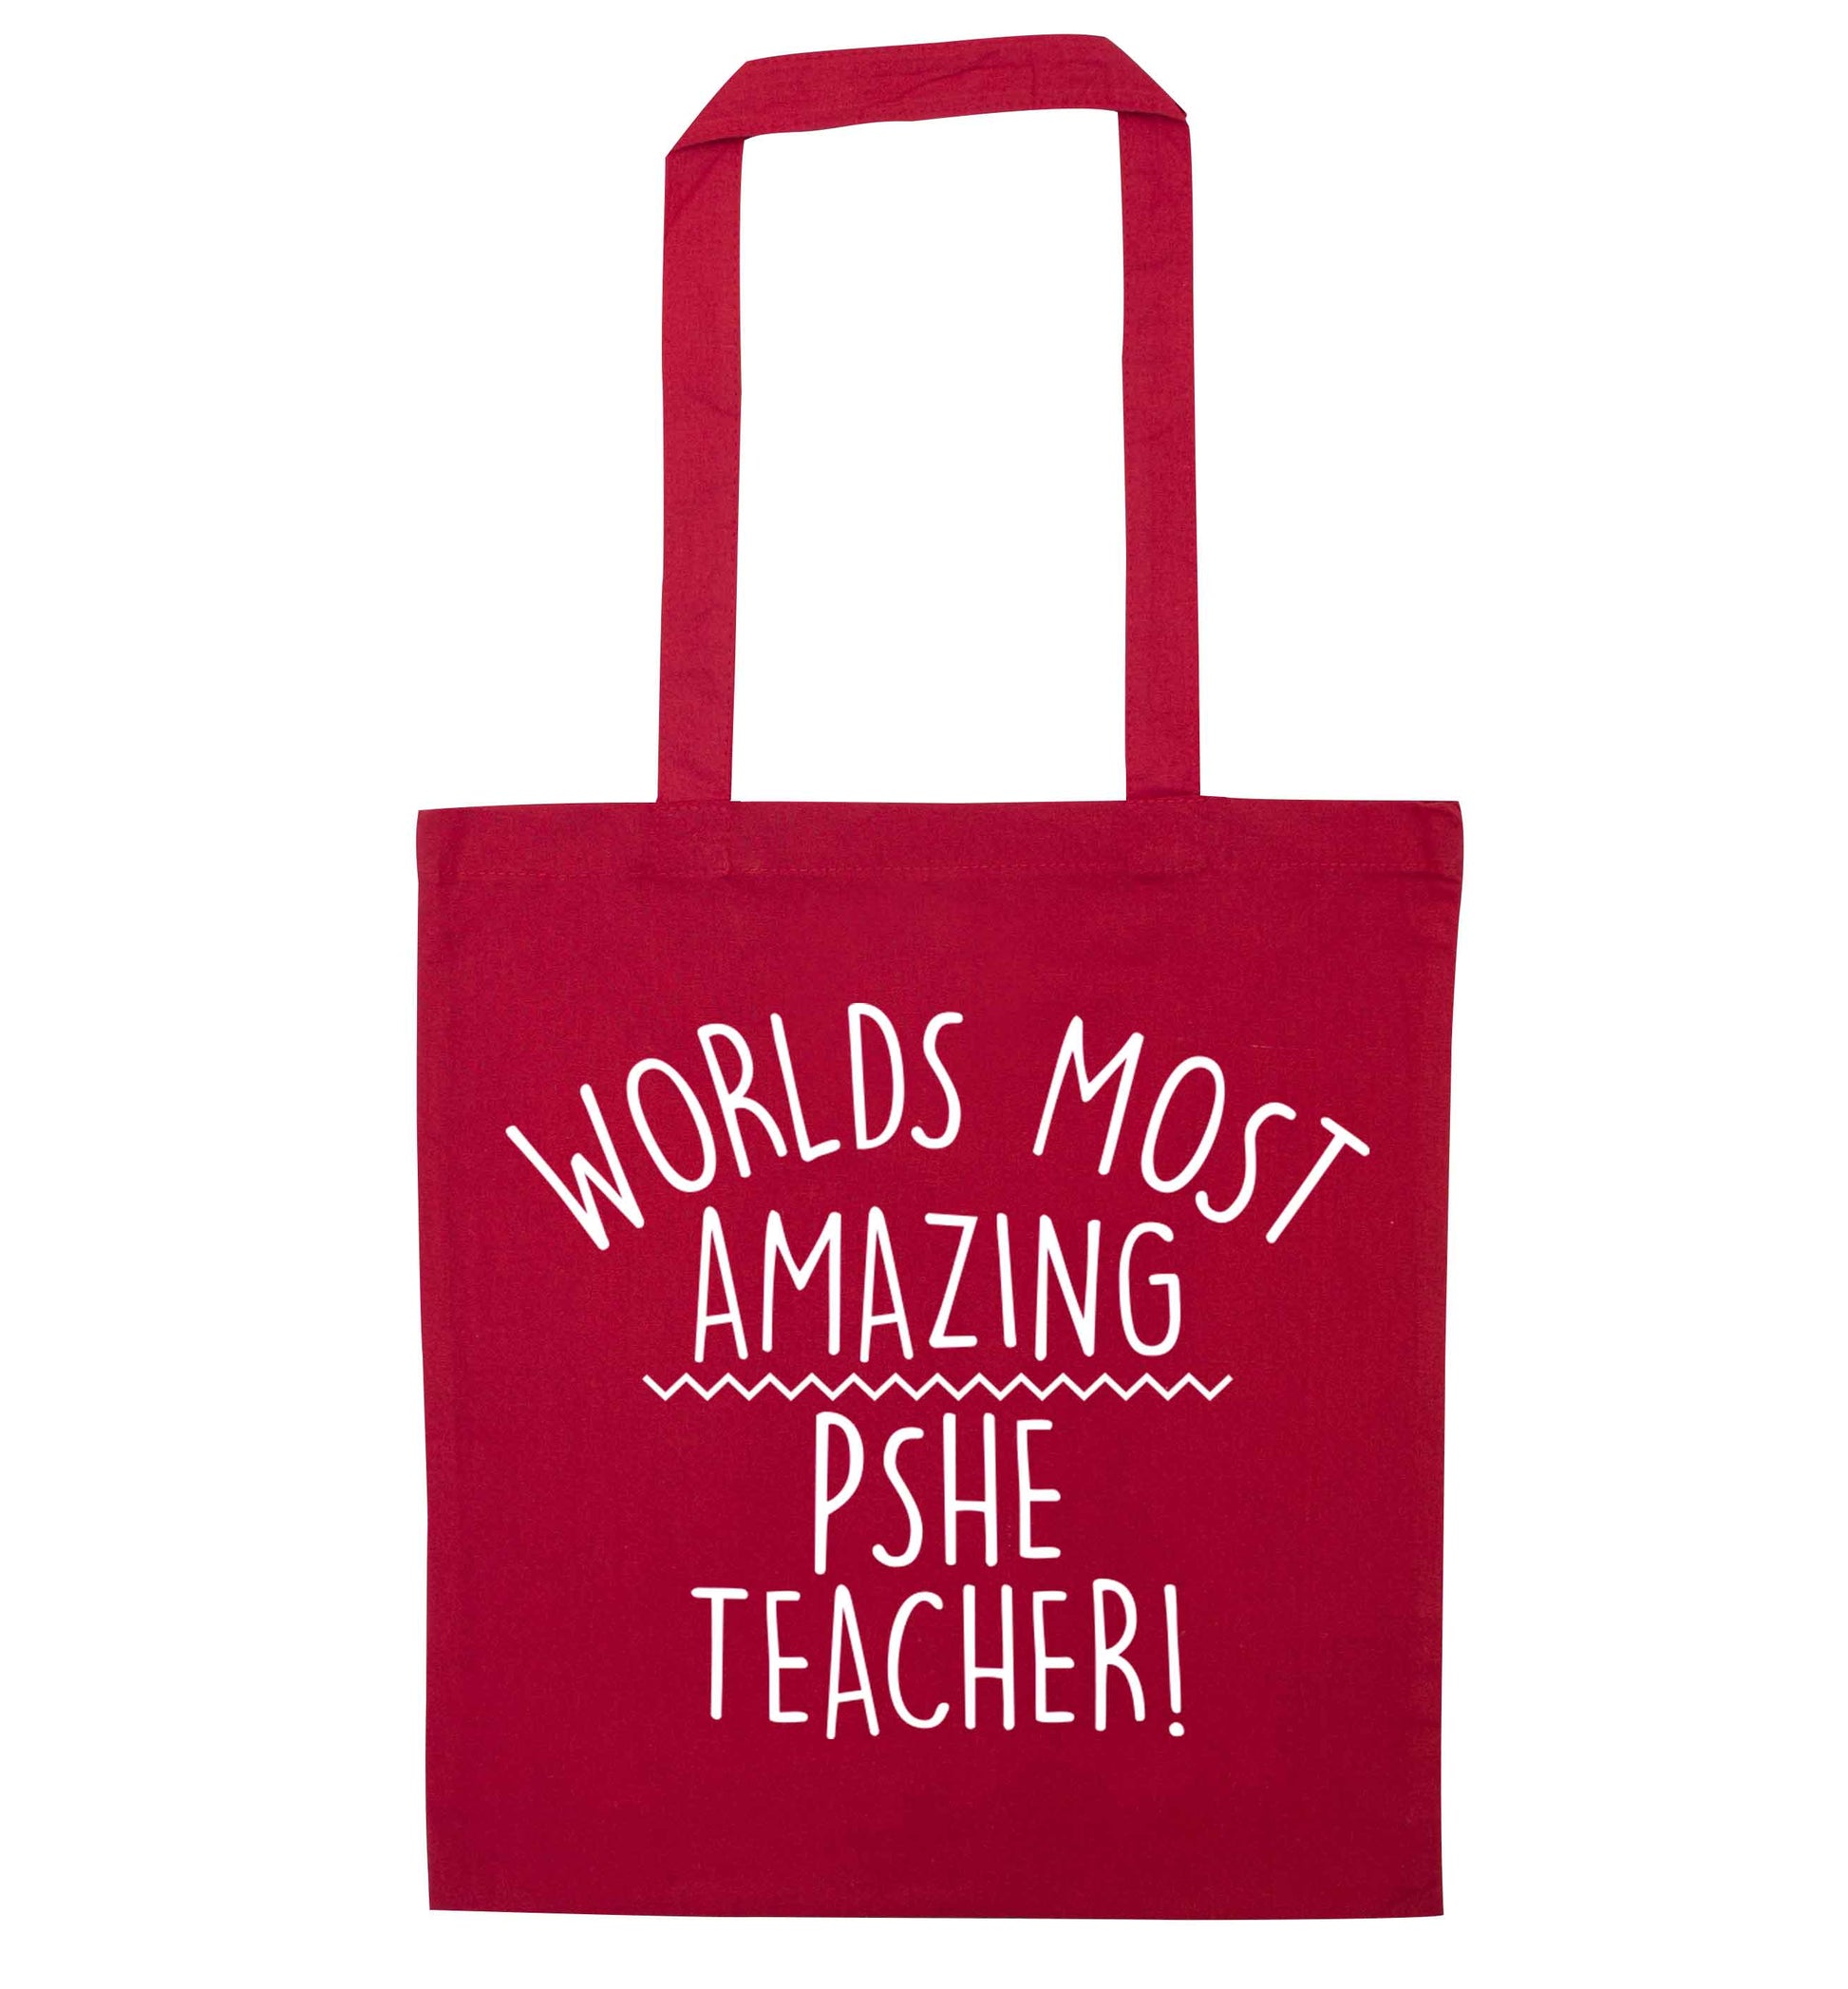 Worlds most amazing PHSE teacher red tote bag